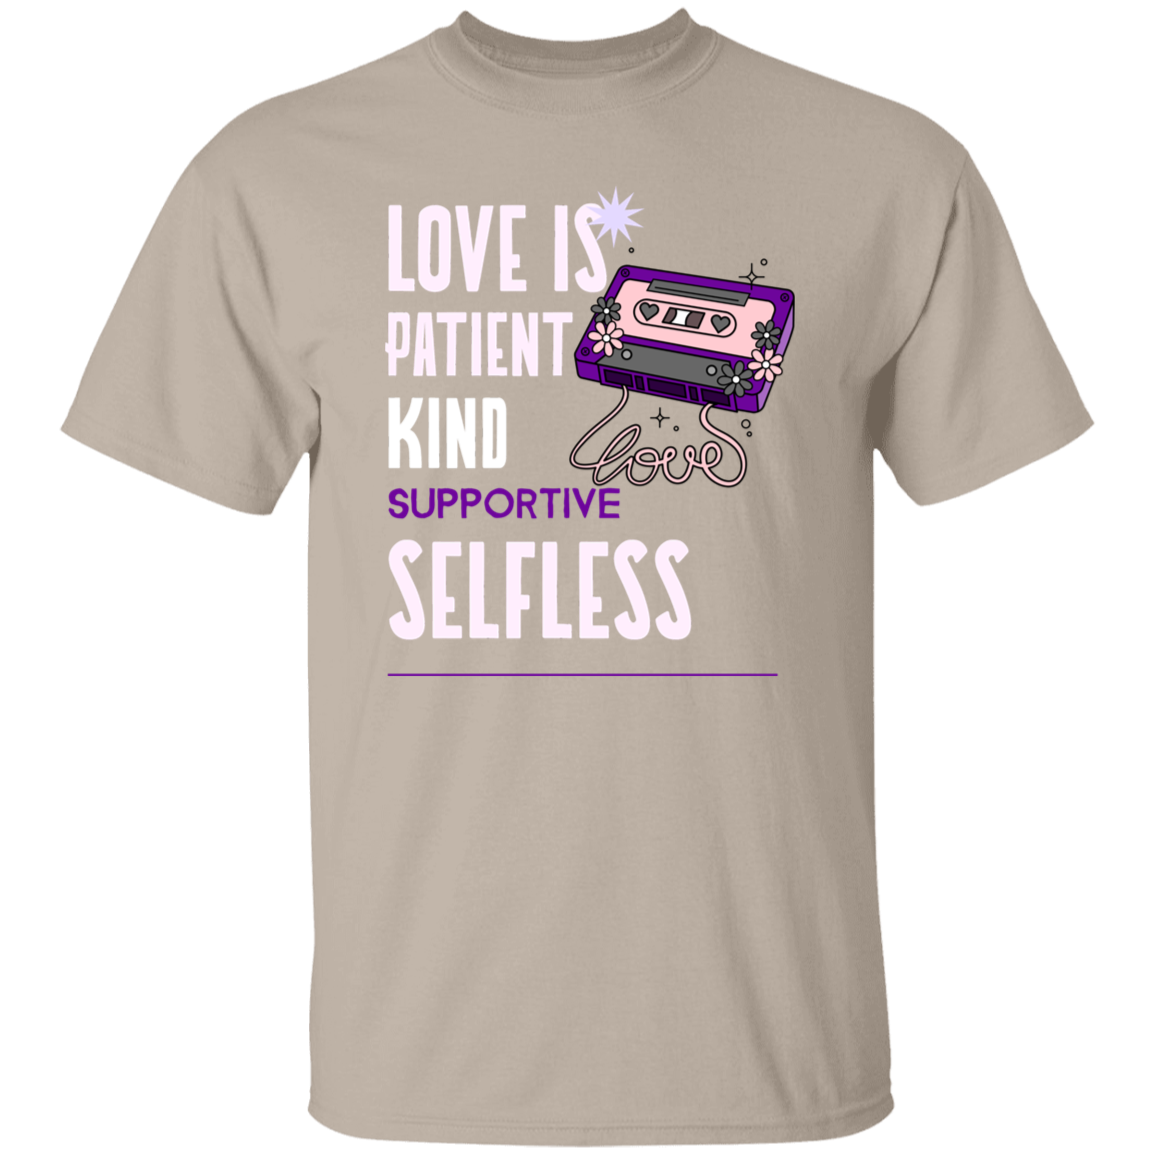 Love Is Patient, Kind, Supportive, Selfless T-Shirt